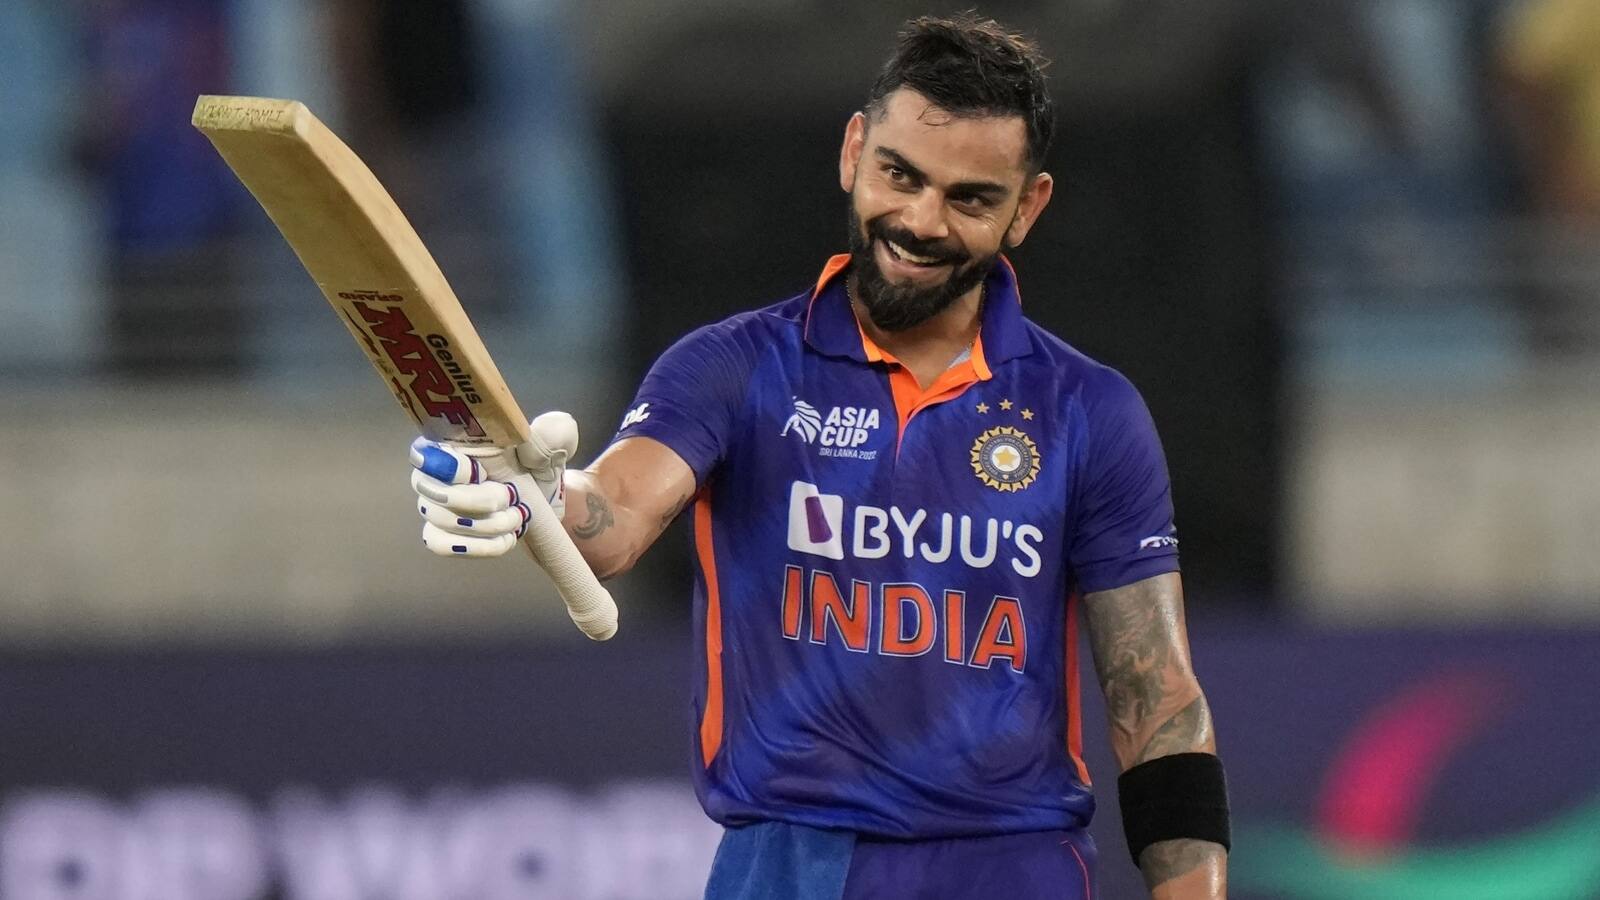 Virat Kohli and Wanindu Hasaranga see significant gains as ICC releases updated T20I player rankings